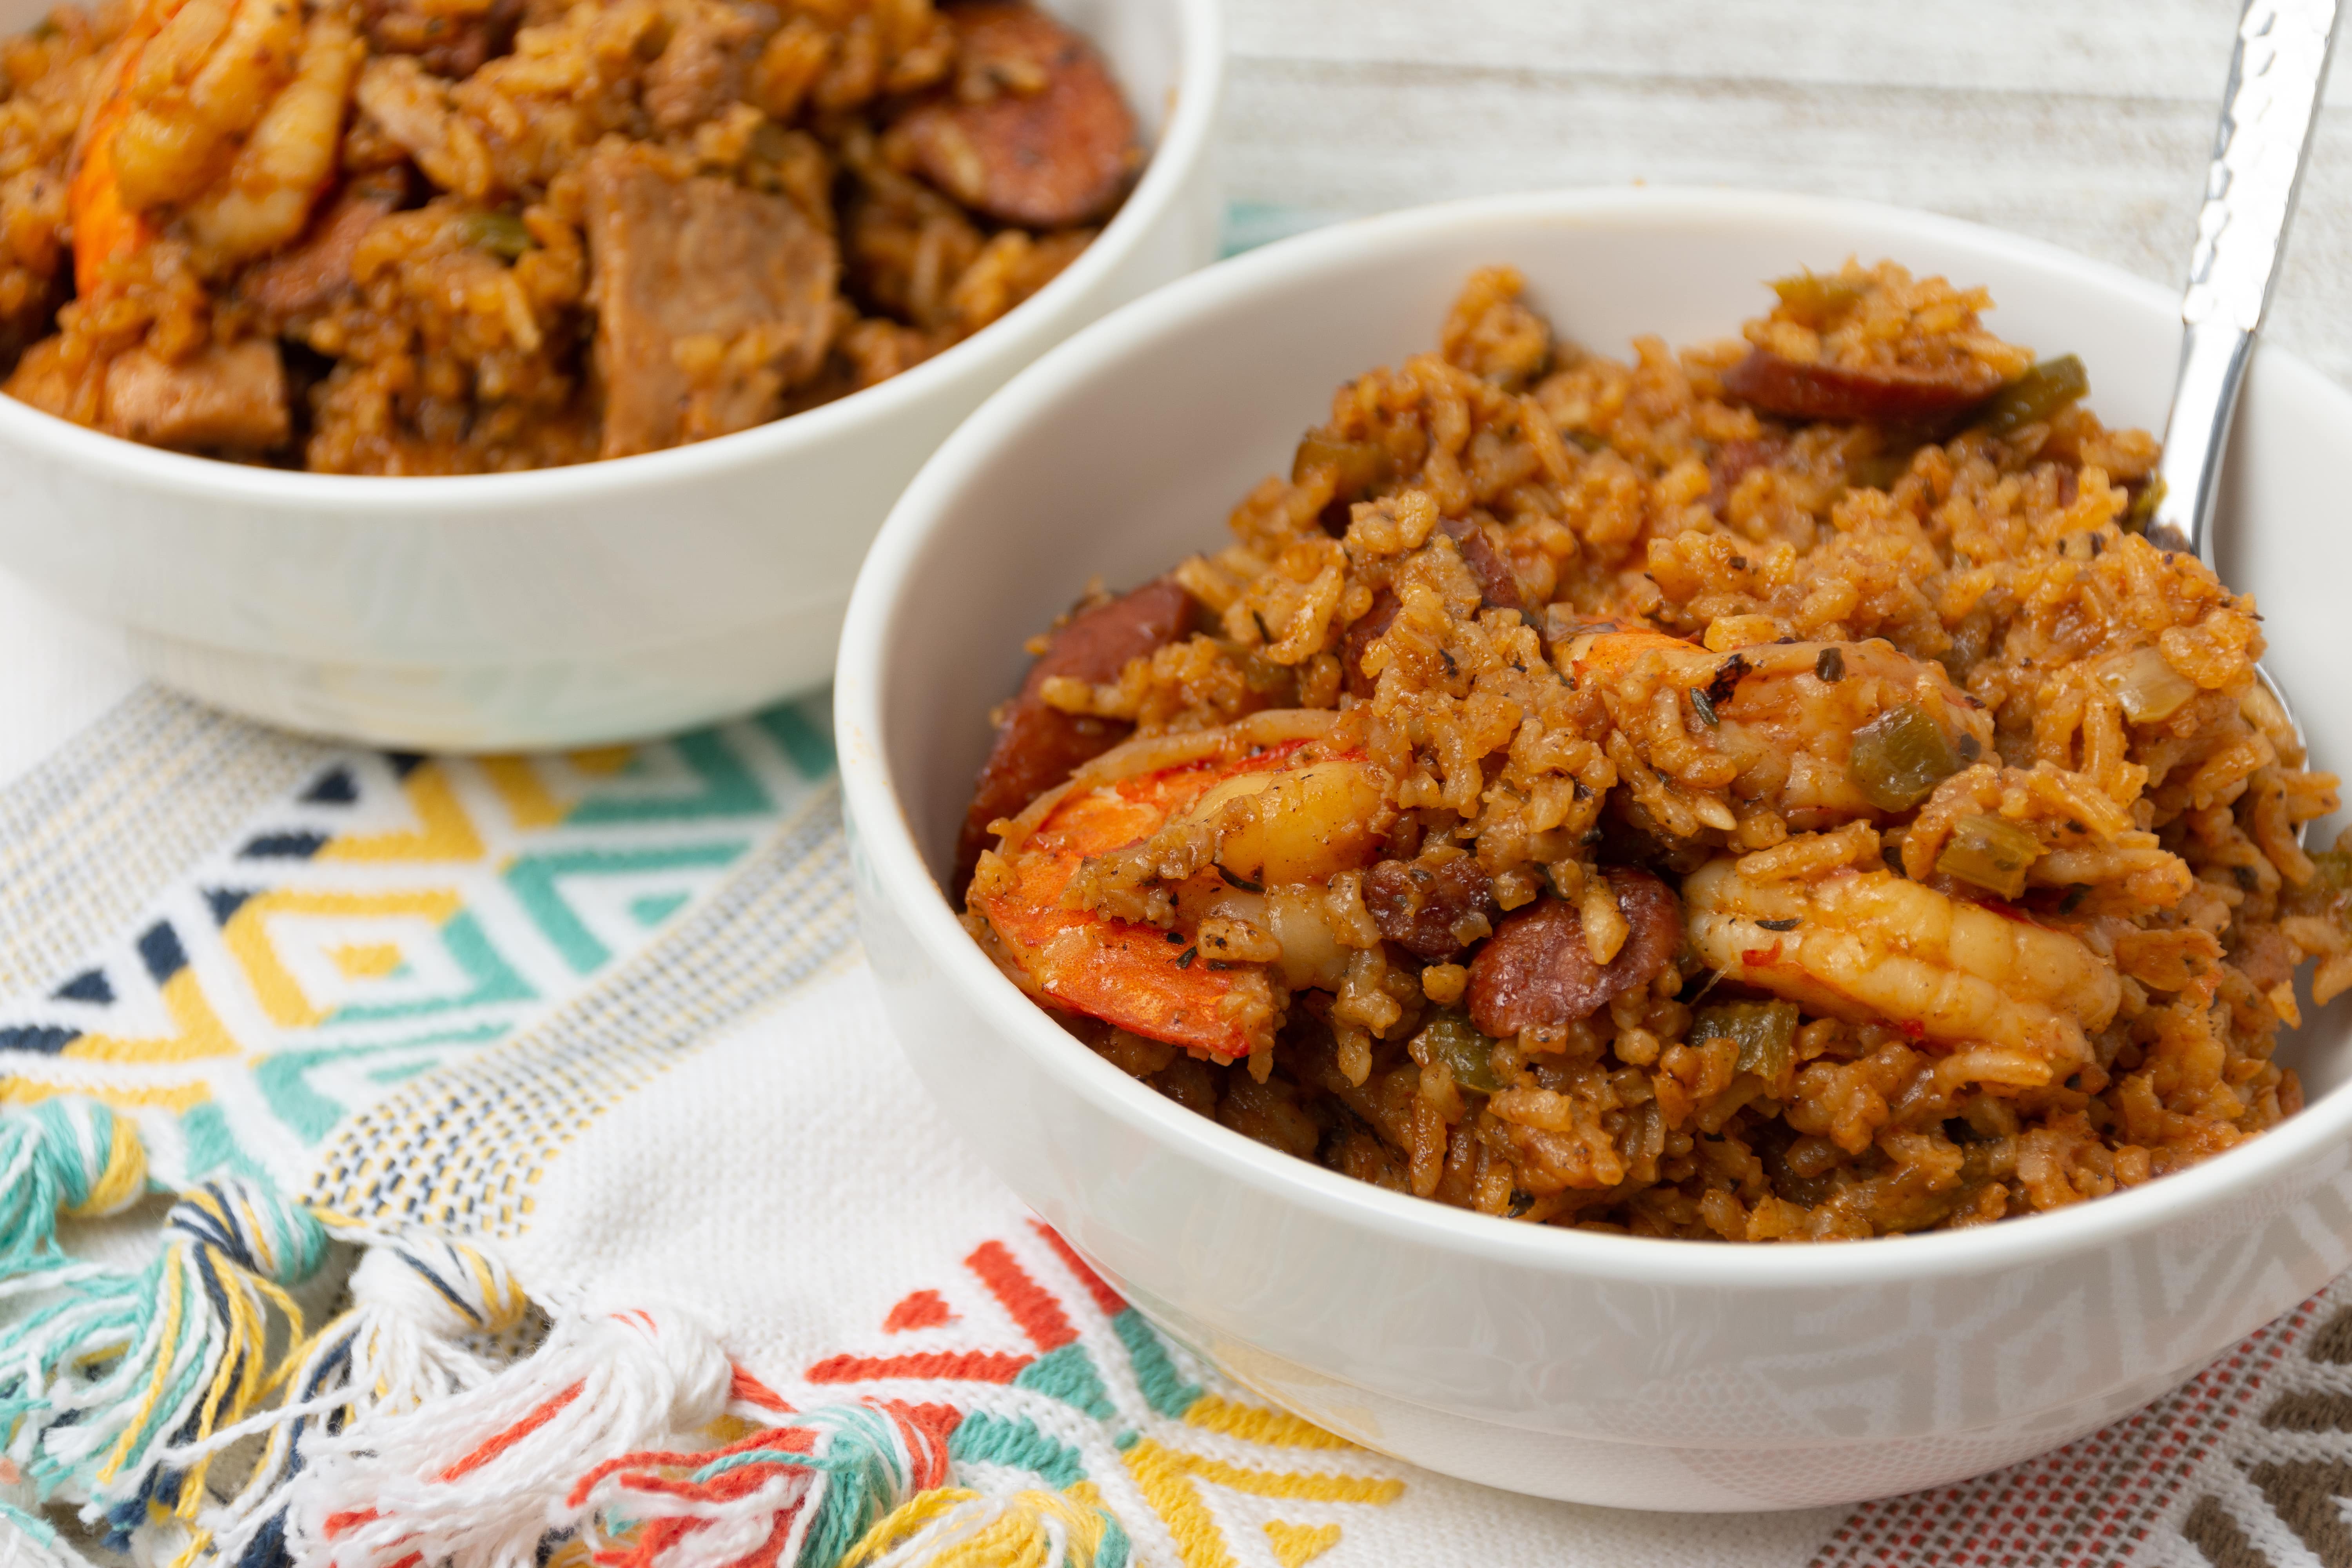 Fuchs North America introduces its Family Recipes Collection of seasonings, flavors and bases.  Pictured is jambalaya, featuring a seasoning from the new collection.